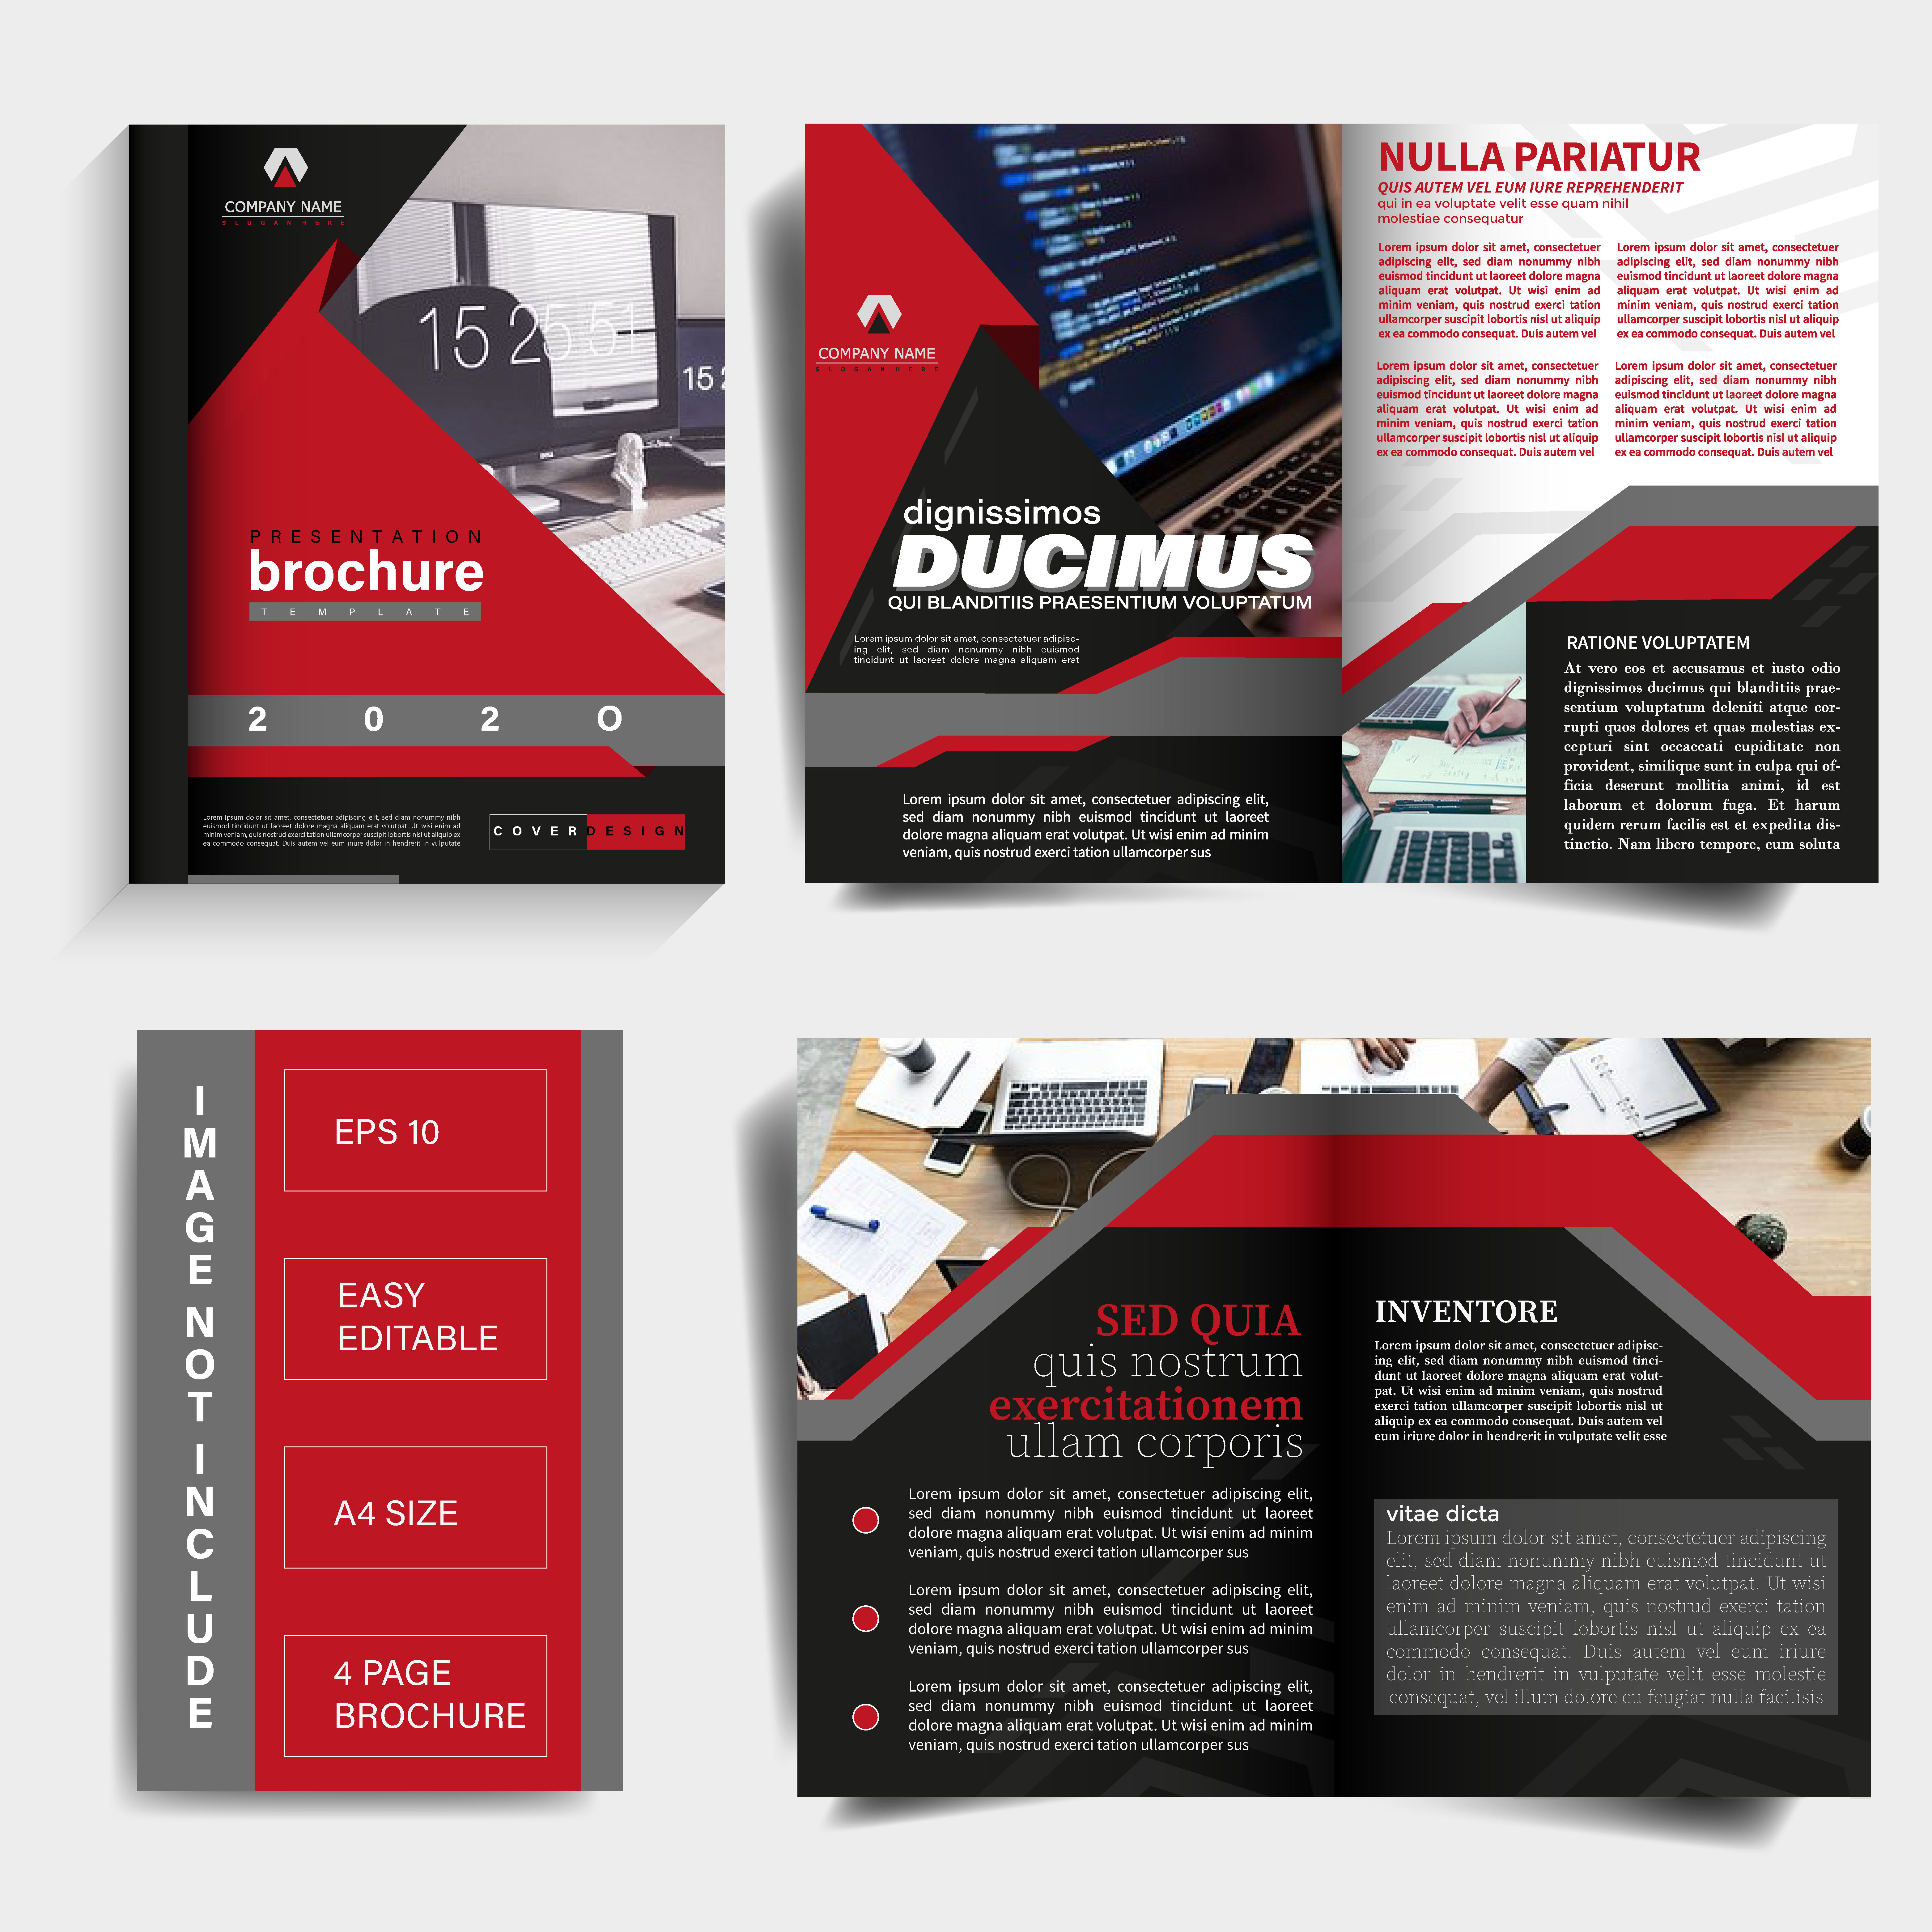 2 Page Brochure Template from static.vecteezy.com